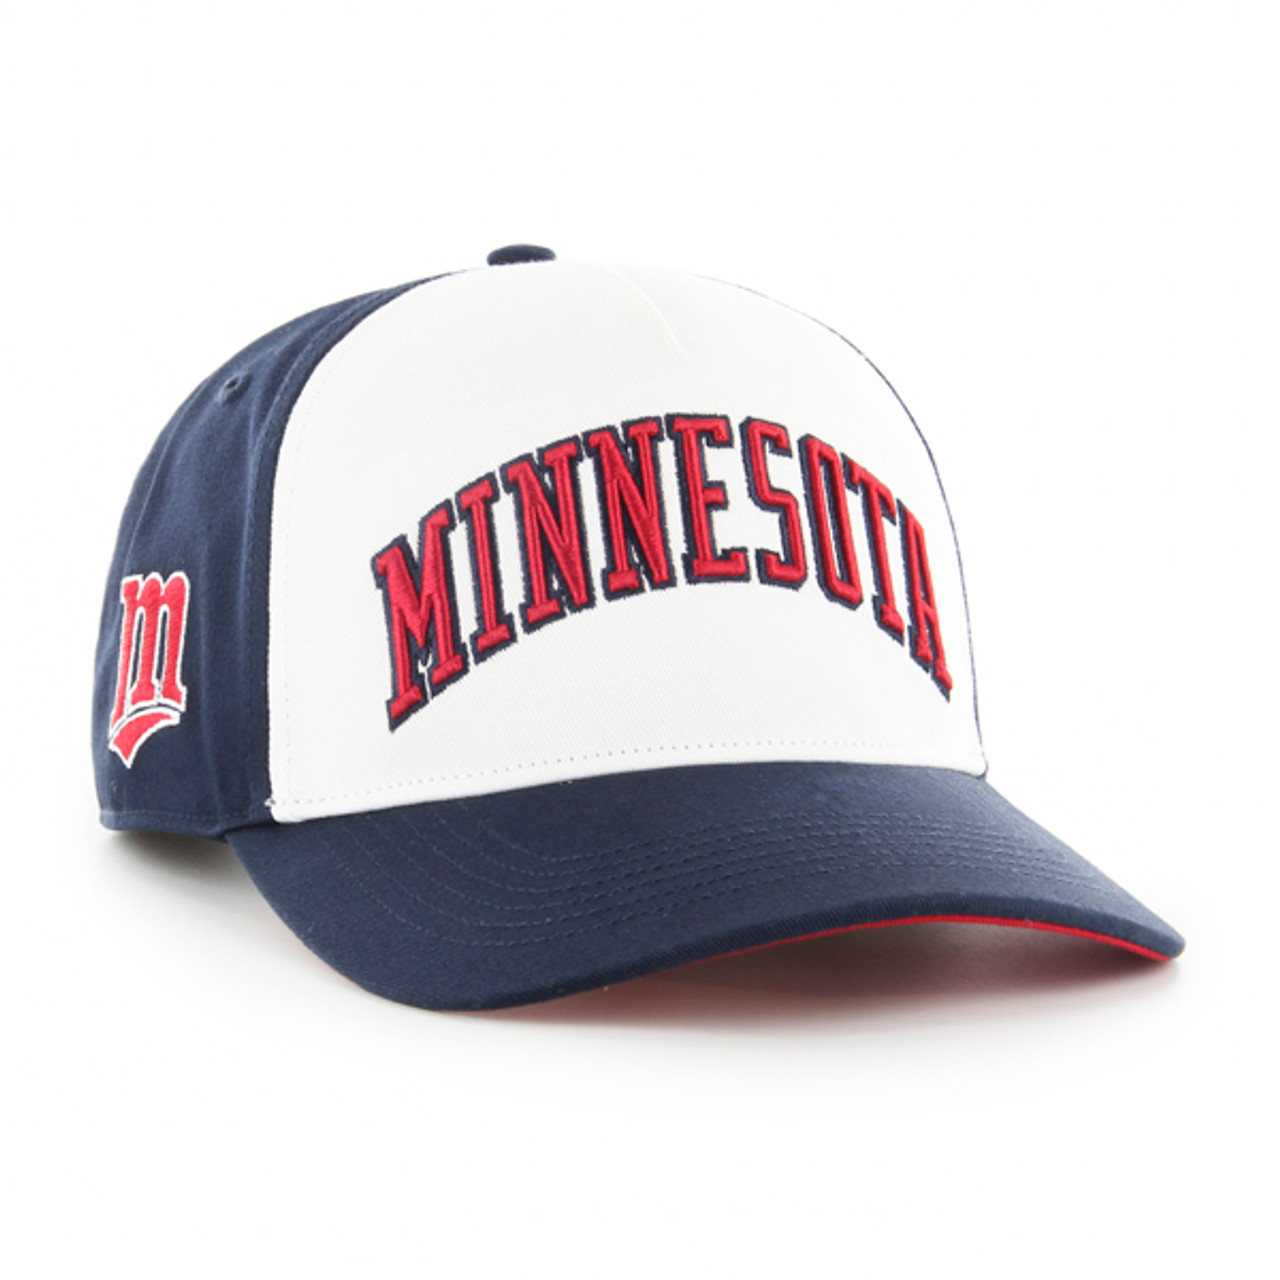 Men's ’47 Brand Minnesota Twins Cooperstown Collection Contra Hitch  Snapback Adjustable Cap